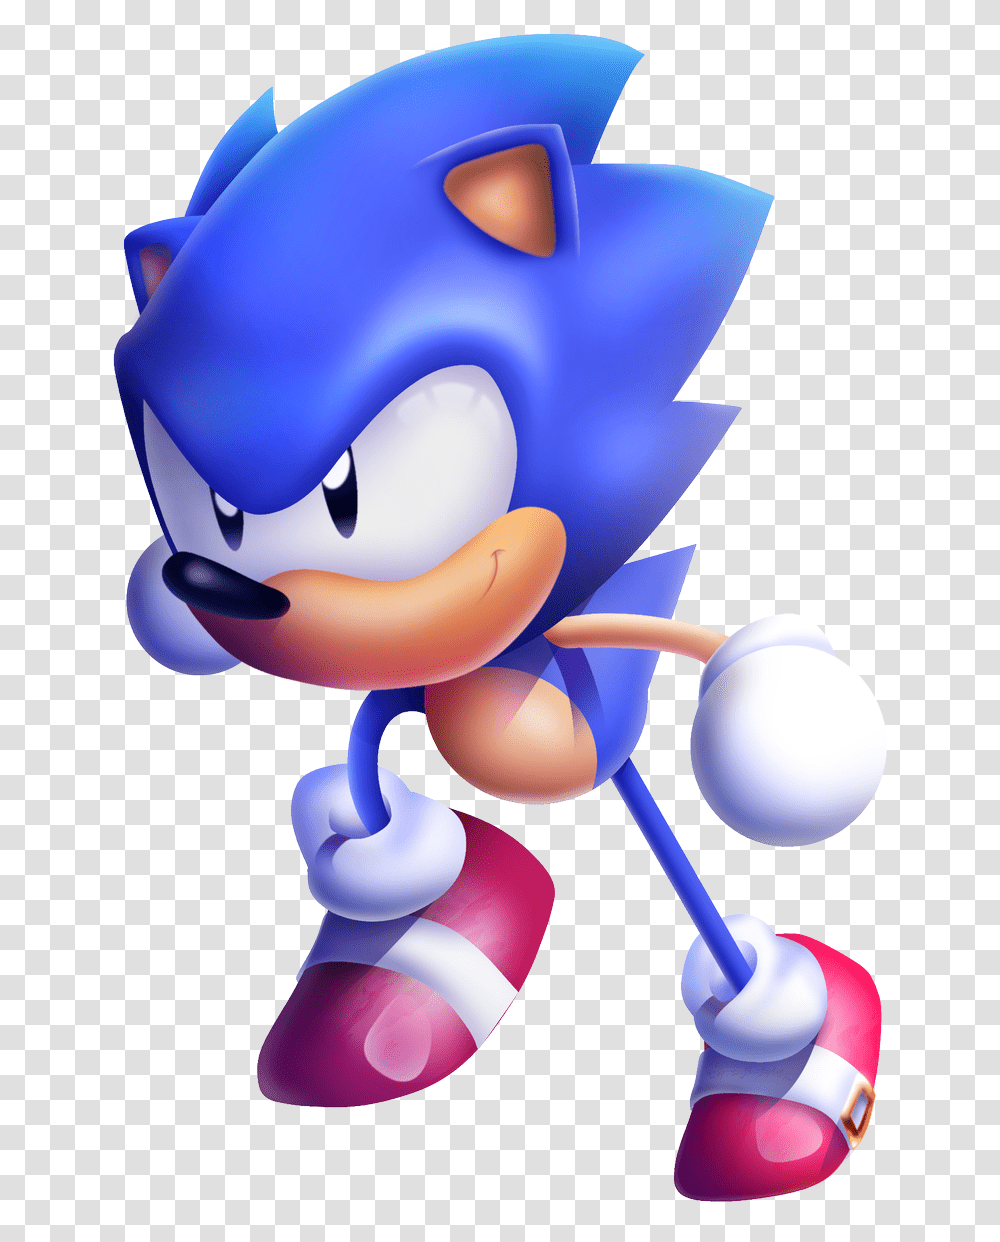 Lixes The Prototype Toei Sonic Renders Sonic Cd, Toy, Pac Man, Graphics, Art Transparent Png